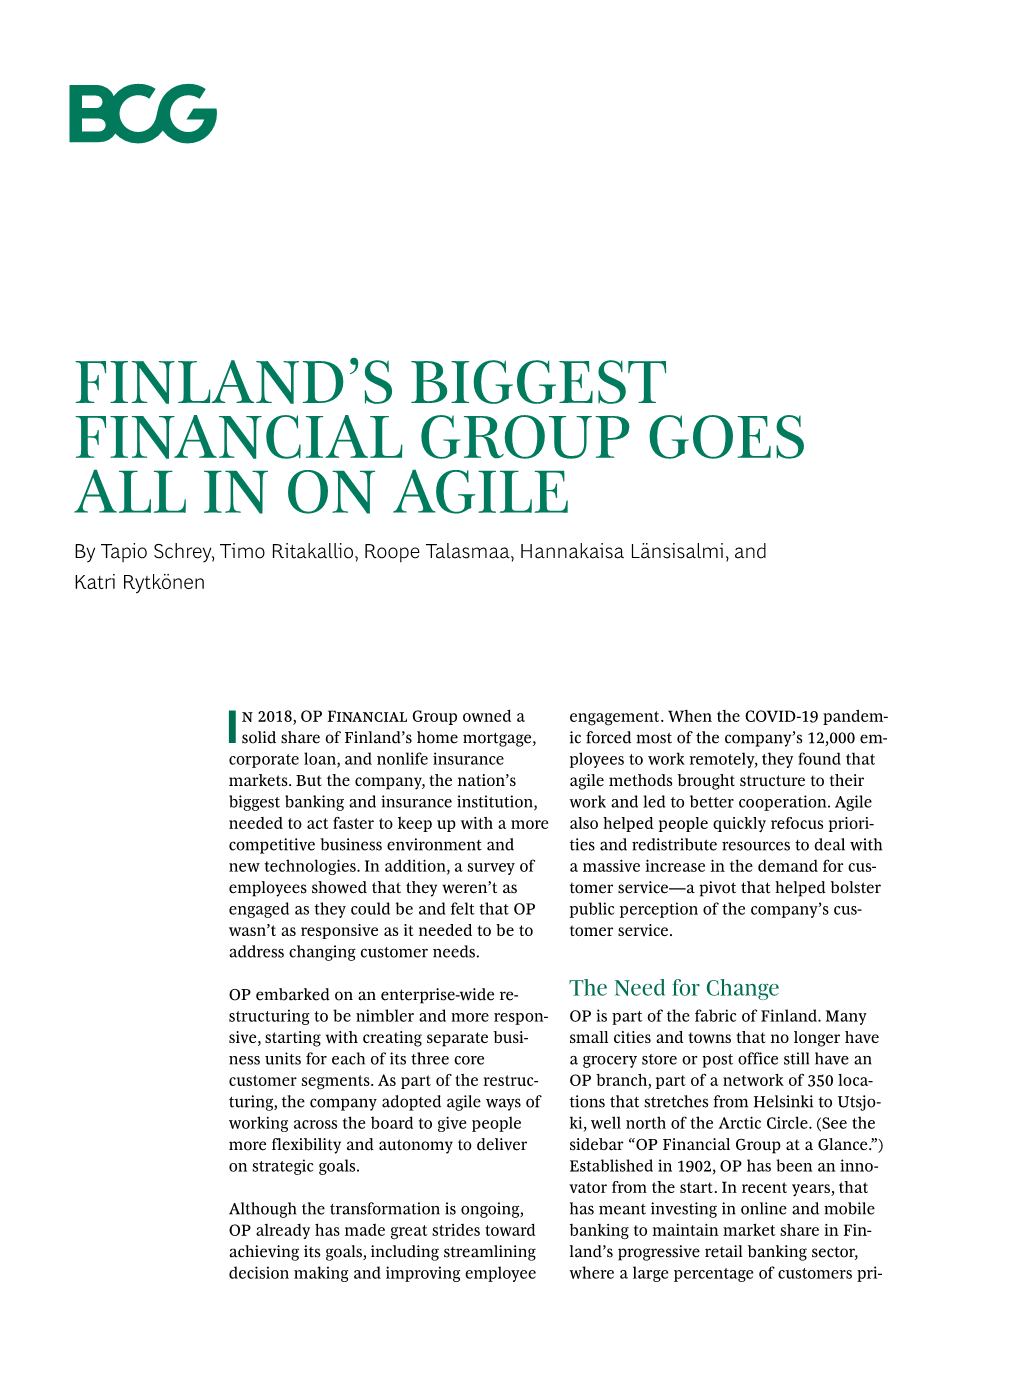 Finland's Biggest Financial Group Goes All in on Agile